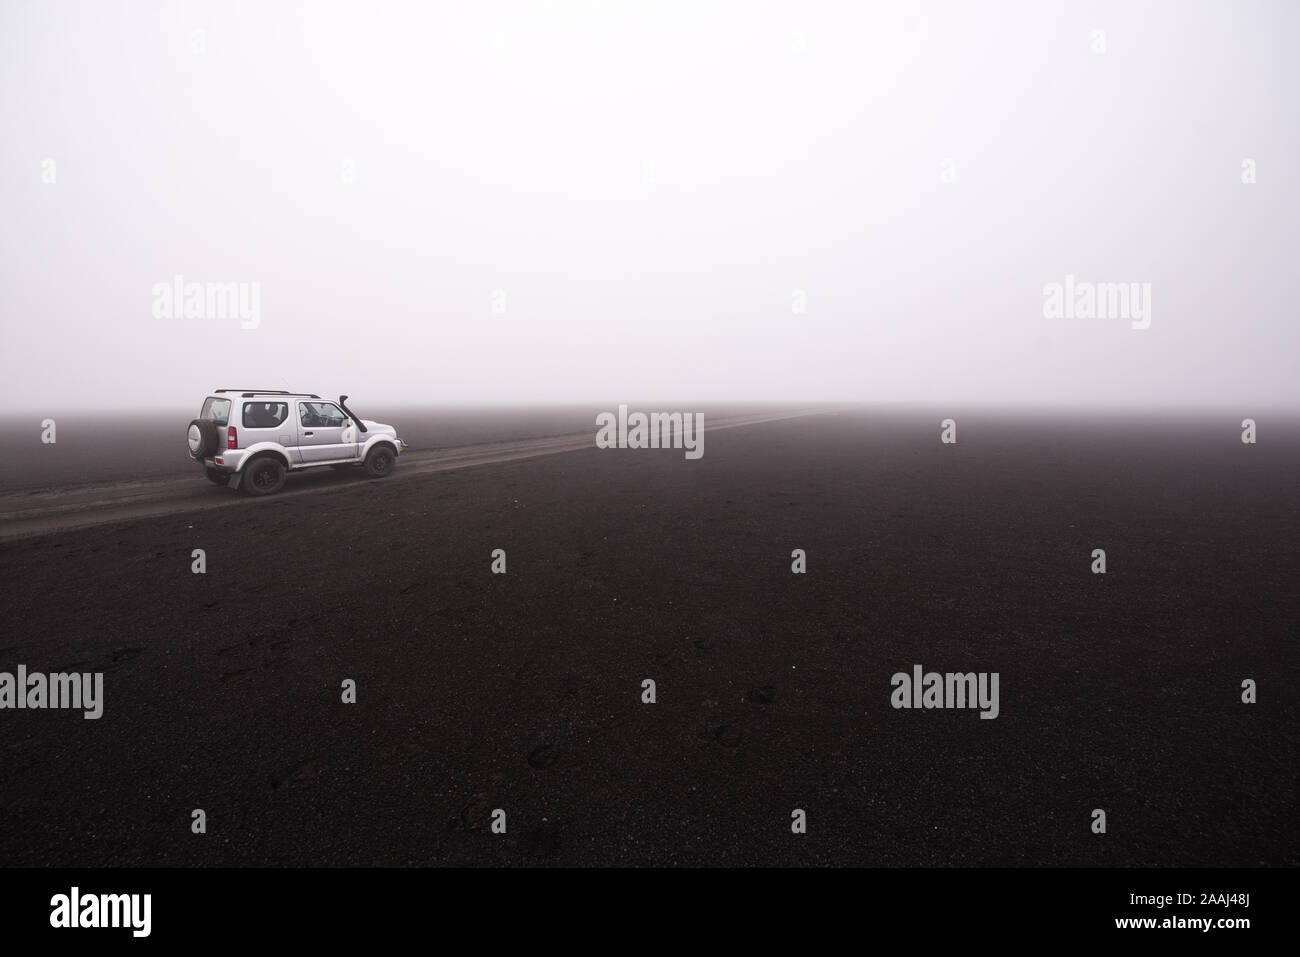 Off road vehicle on dirt track in foggy conditions, Landmannalaugar, Iceland Stock Photo